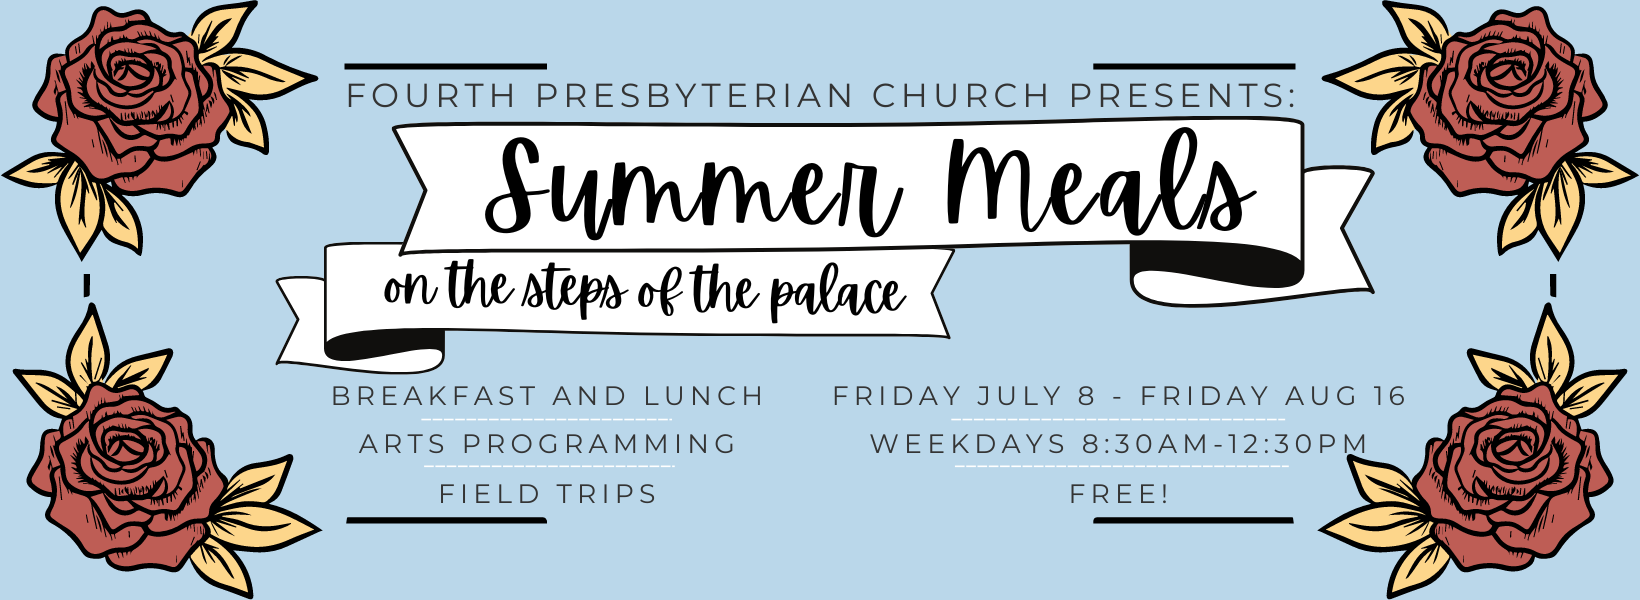 Summer Meals: on the steps of the palace